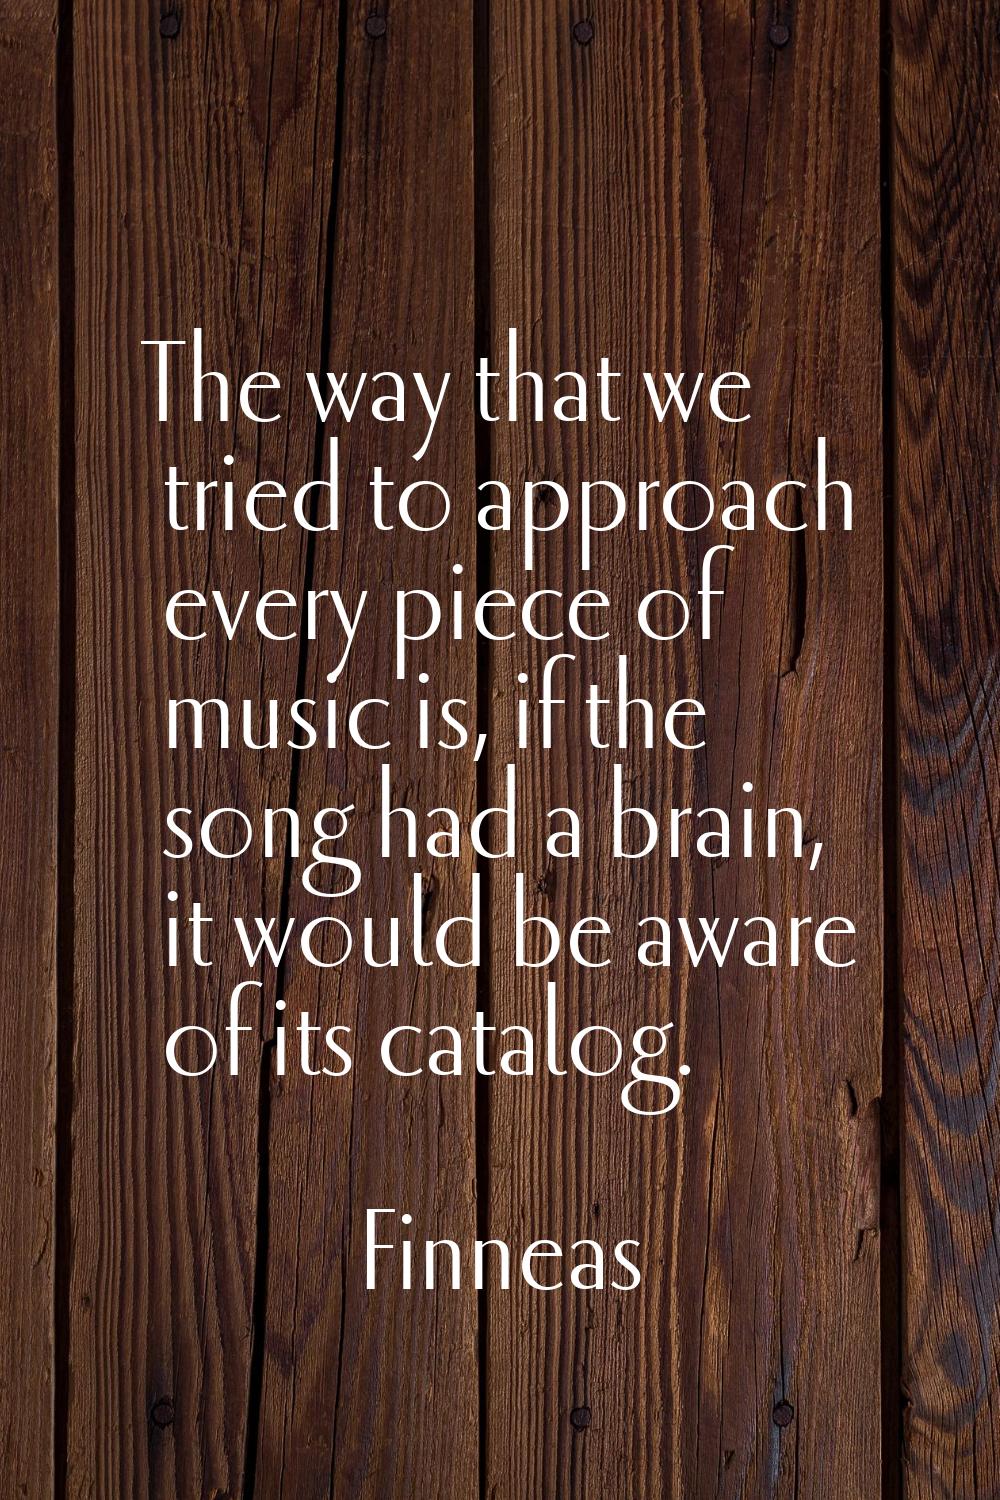 The way that we tried to approach every piece of music is, if the song had a brain, it would be awa